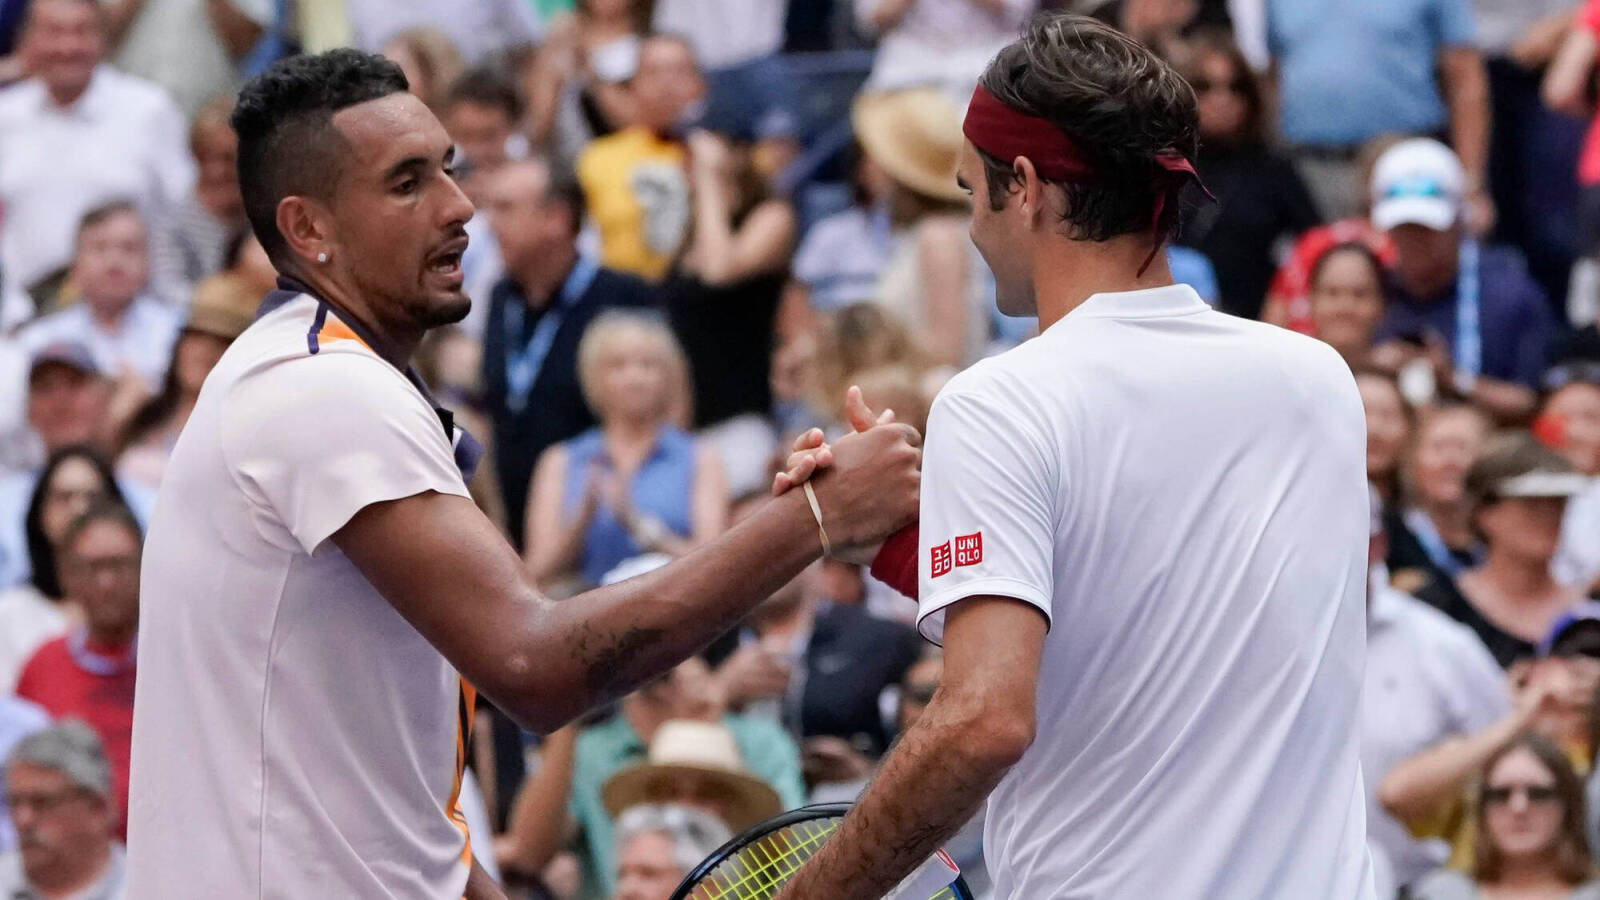 'Put me in a three-star hotel,' Roger Federer once put Nick Kyrgios through 'patchy' Wi-Fi and sleepless nights in Switzerland.